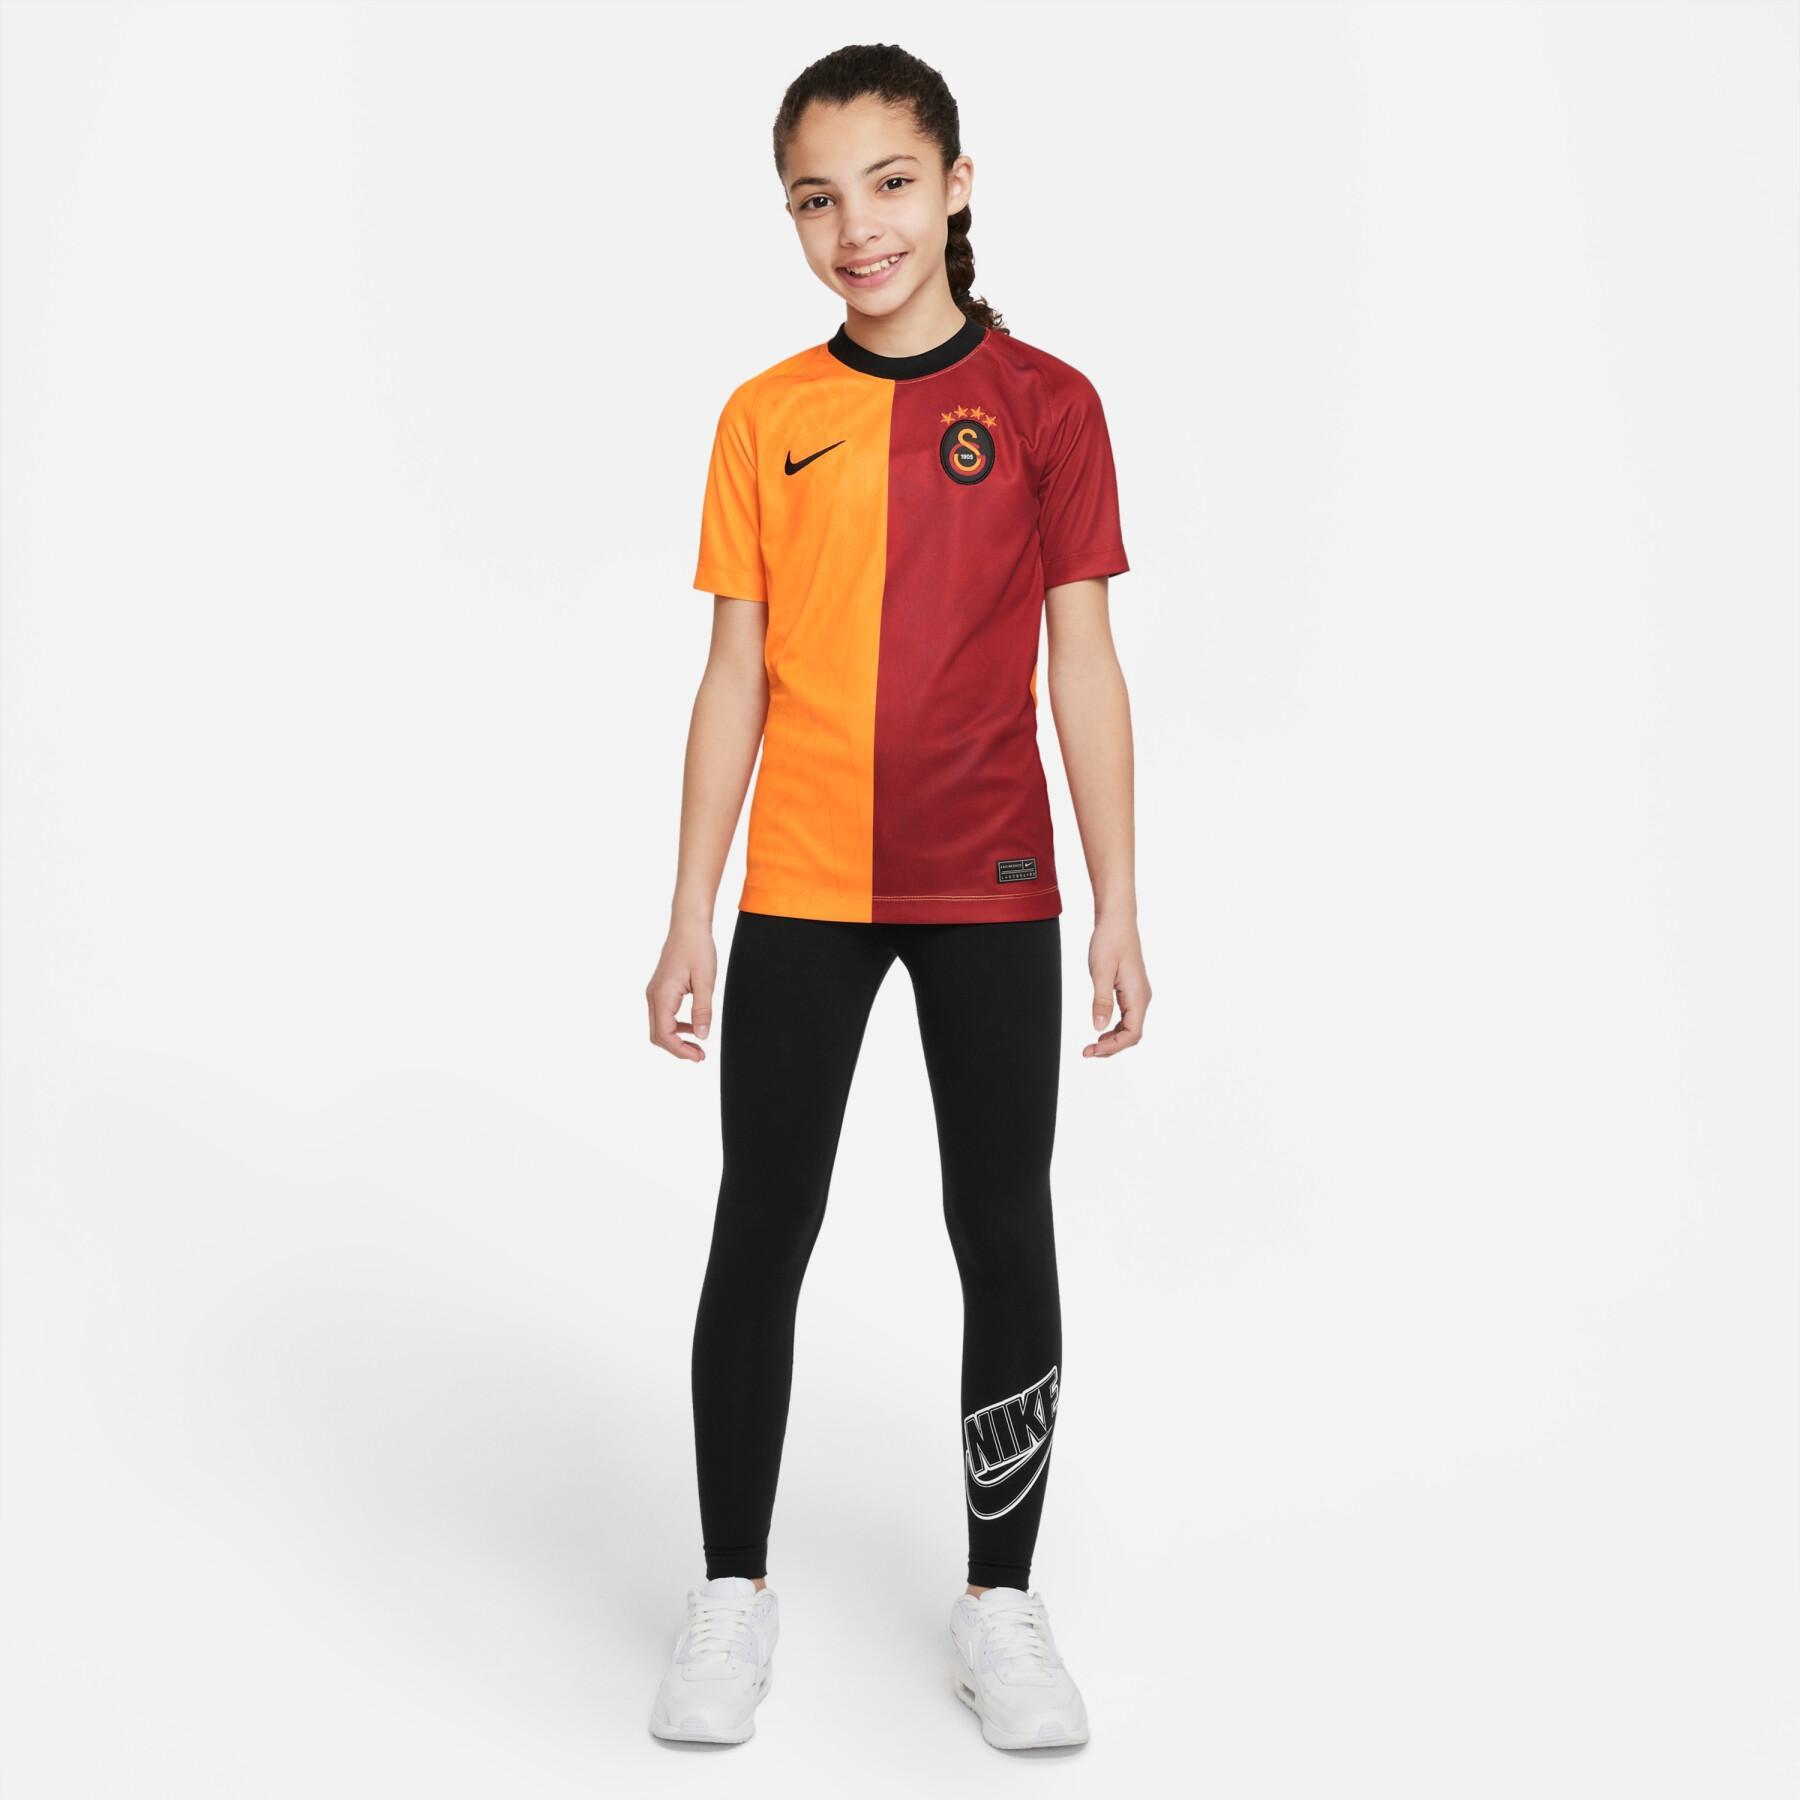 Children's training jersey athletic top Galatasaray 2022/23